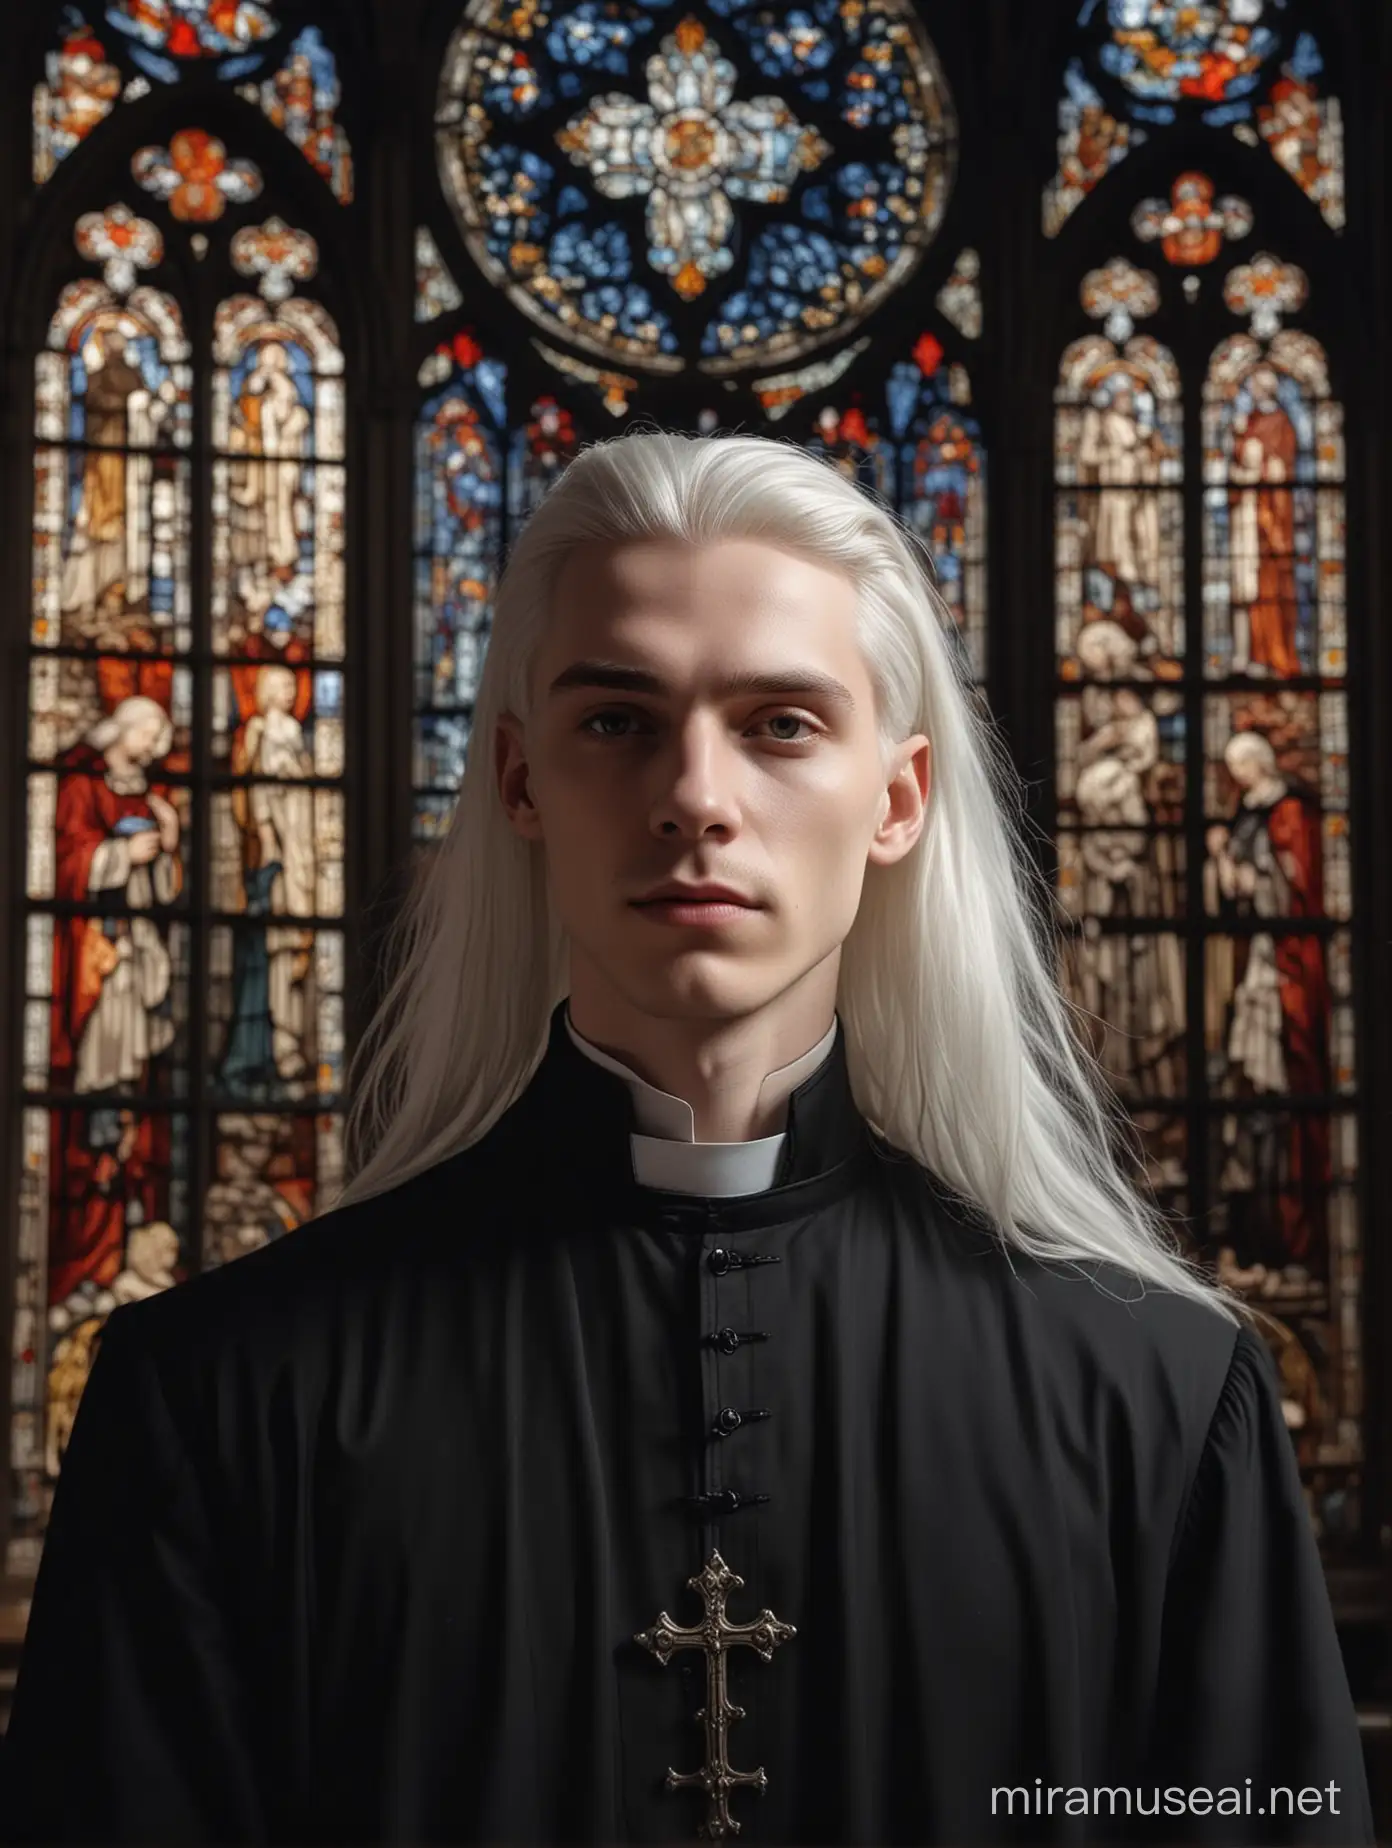  young man pale skin face is clean  full face angle shaven priest with very long white hair dressed in a black cassock against the background of a night Gothic room with large stained glass windows romance fantasy style photorealism cinematic 8K quality high detail pictures full face portrait waist-length portrait full face angle